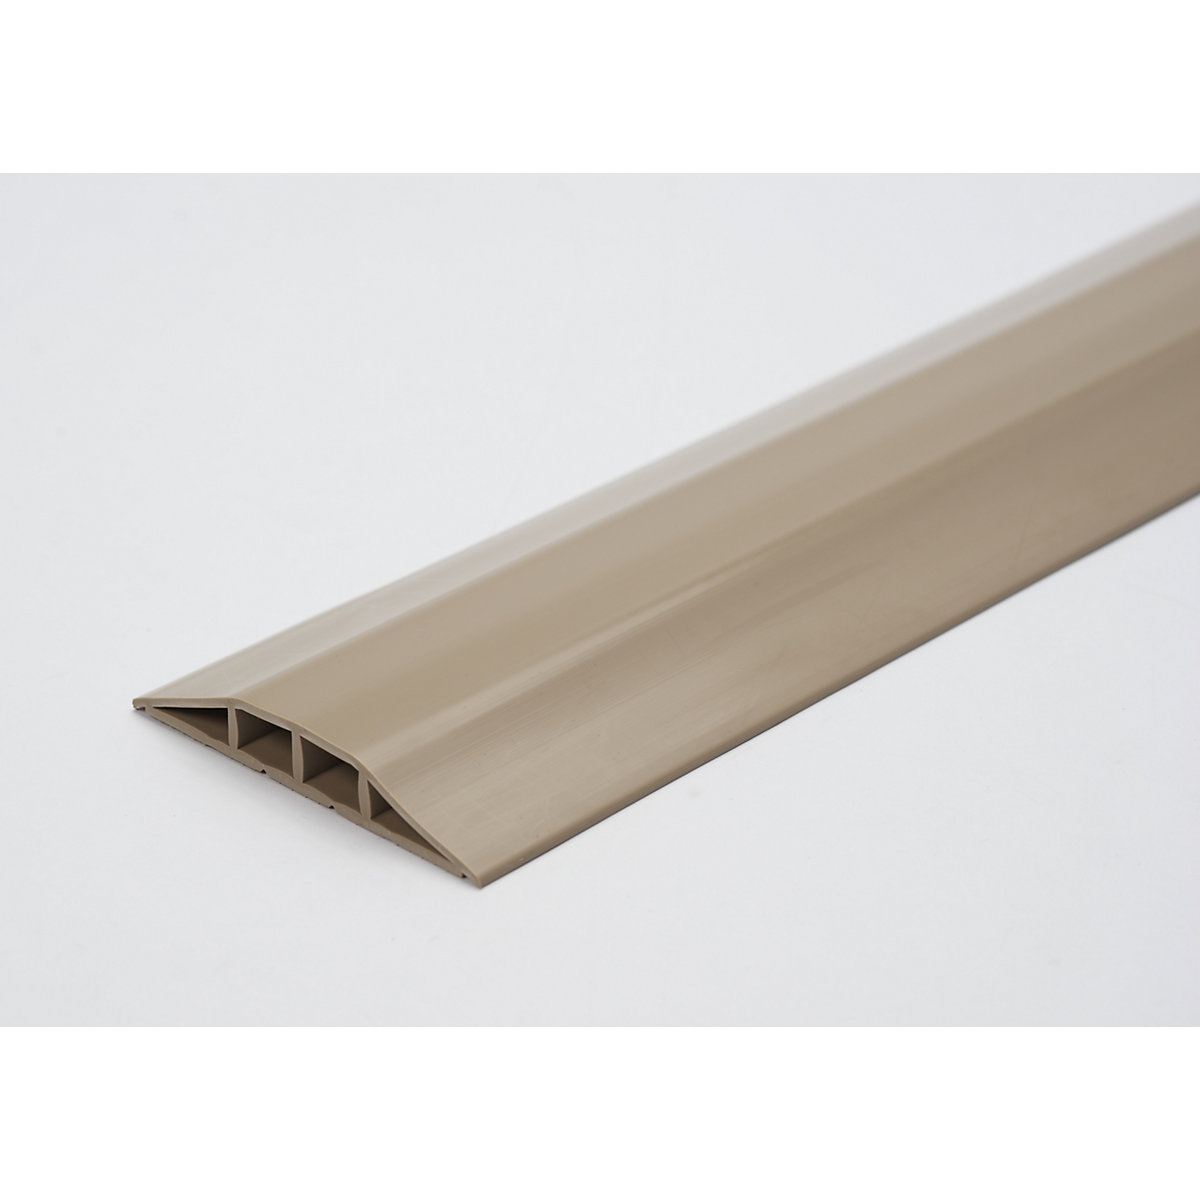 Plastic cable duct, for cables and hoses with Ø up to 10 mm, beige, 2 chambers, length 1.5 m-3